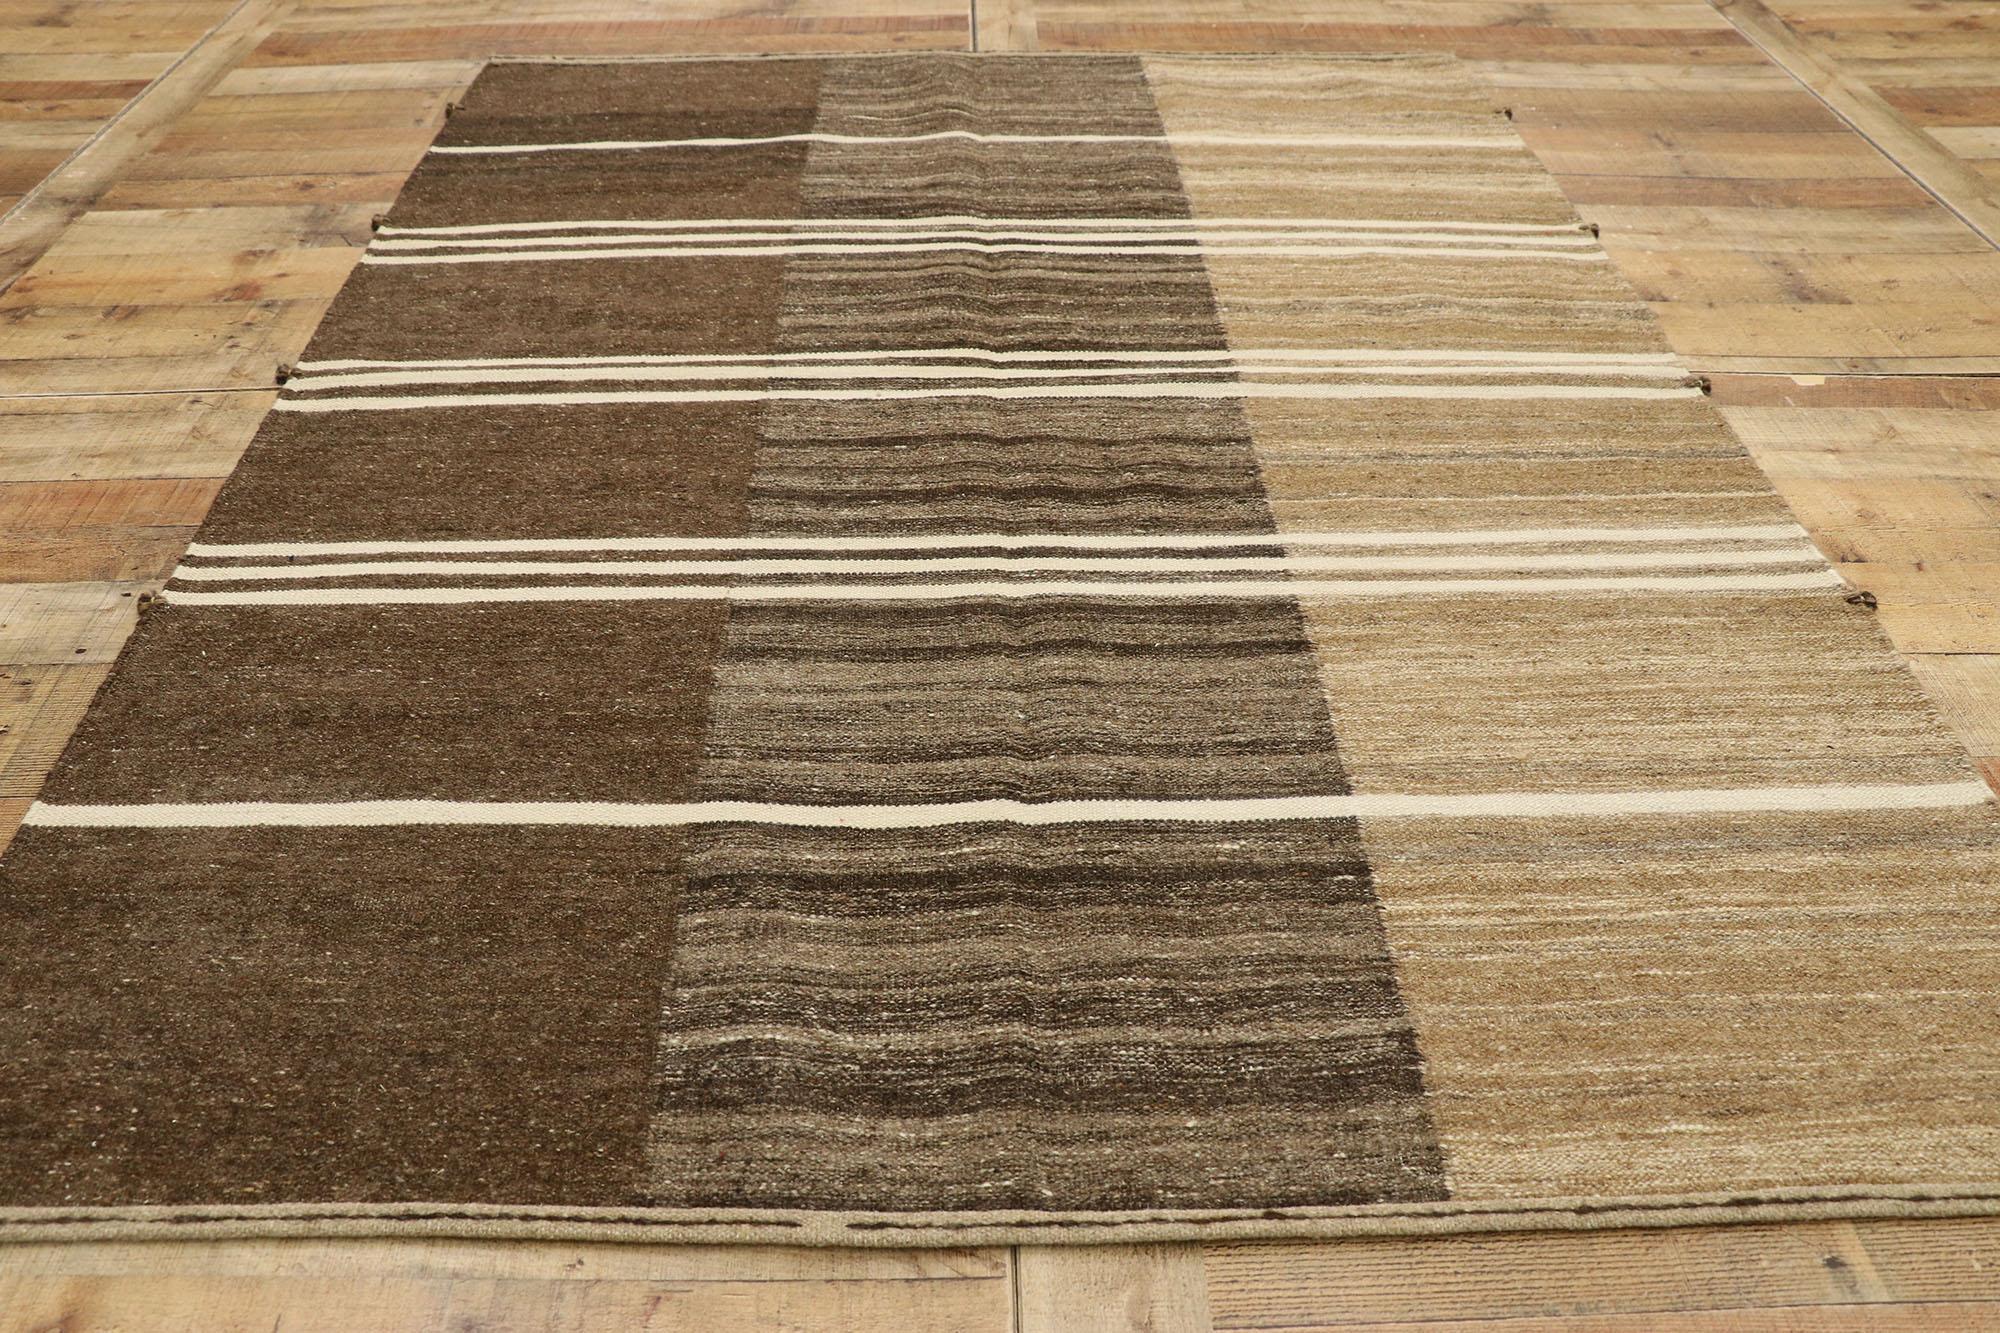 New Contemporary Striped Kilim Rug with Modern Style, Brown Flat-Weave Rug 1